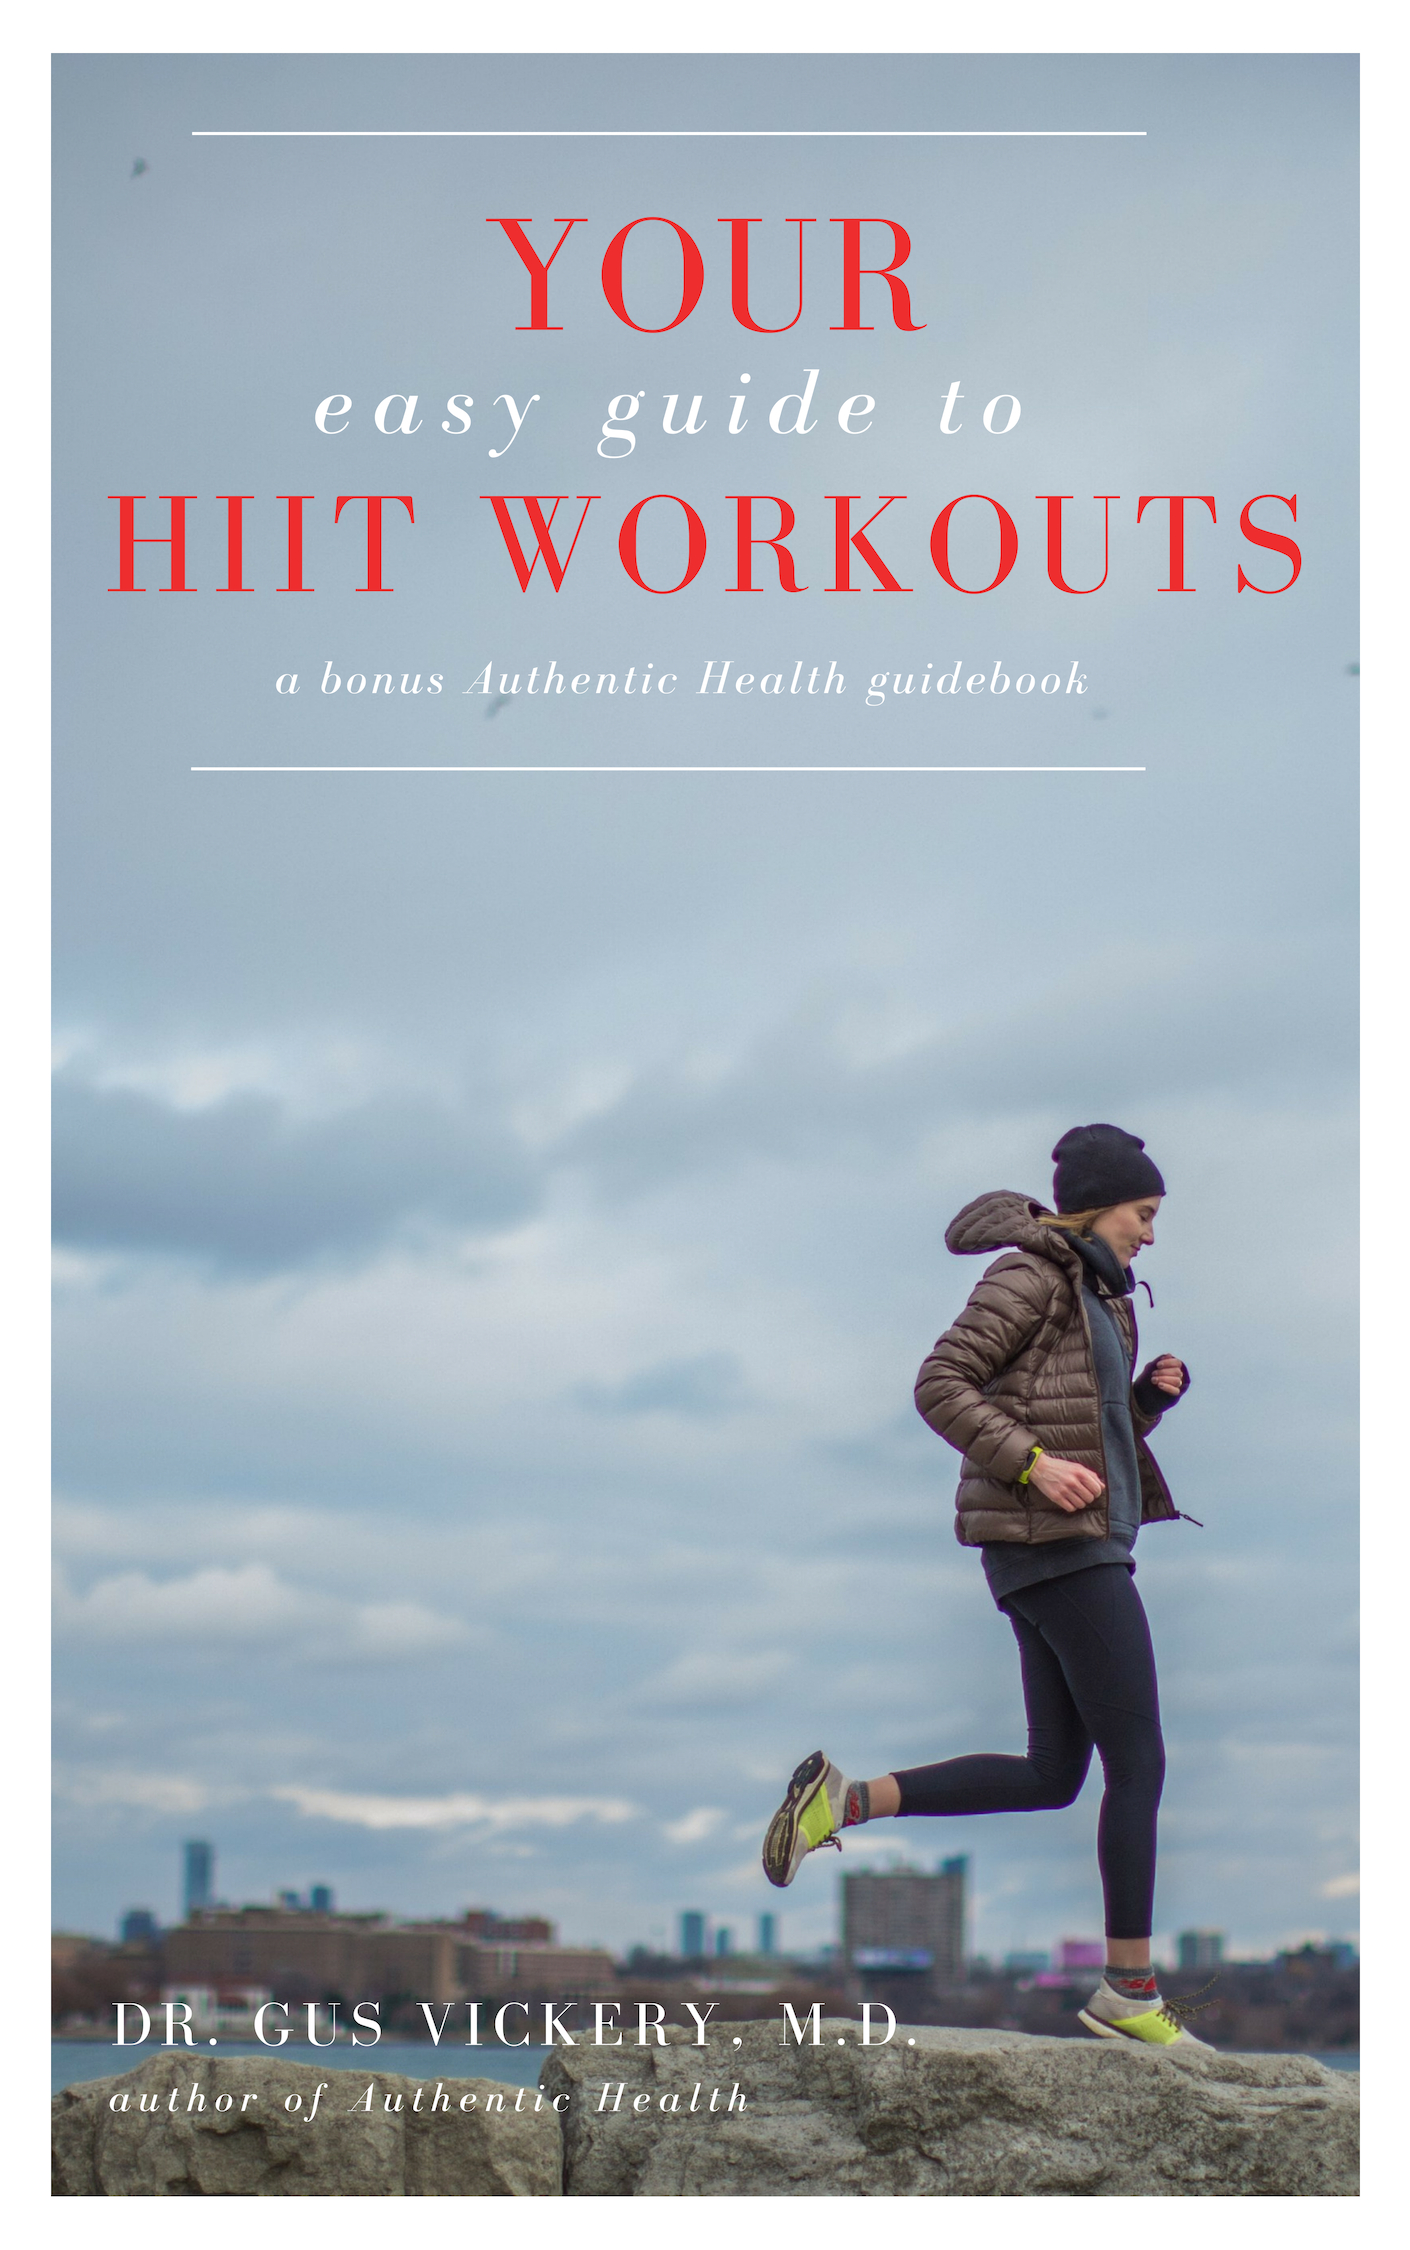 HIIT Workout Ebook Cover.jpg